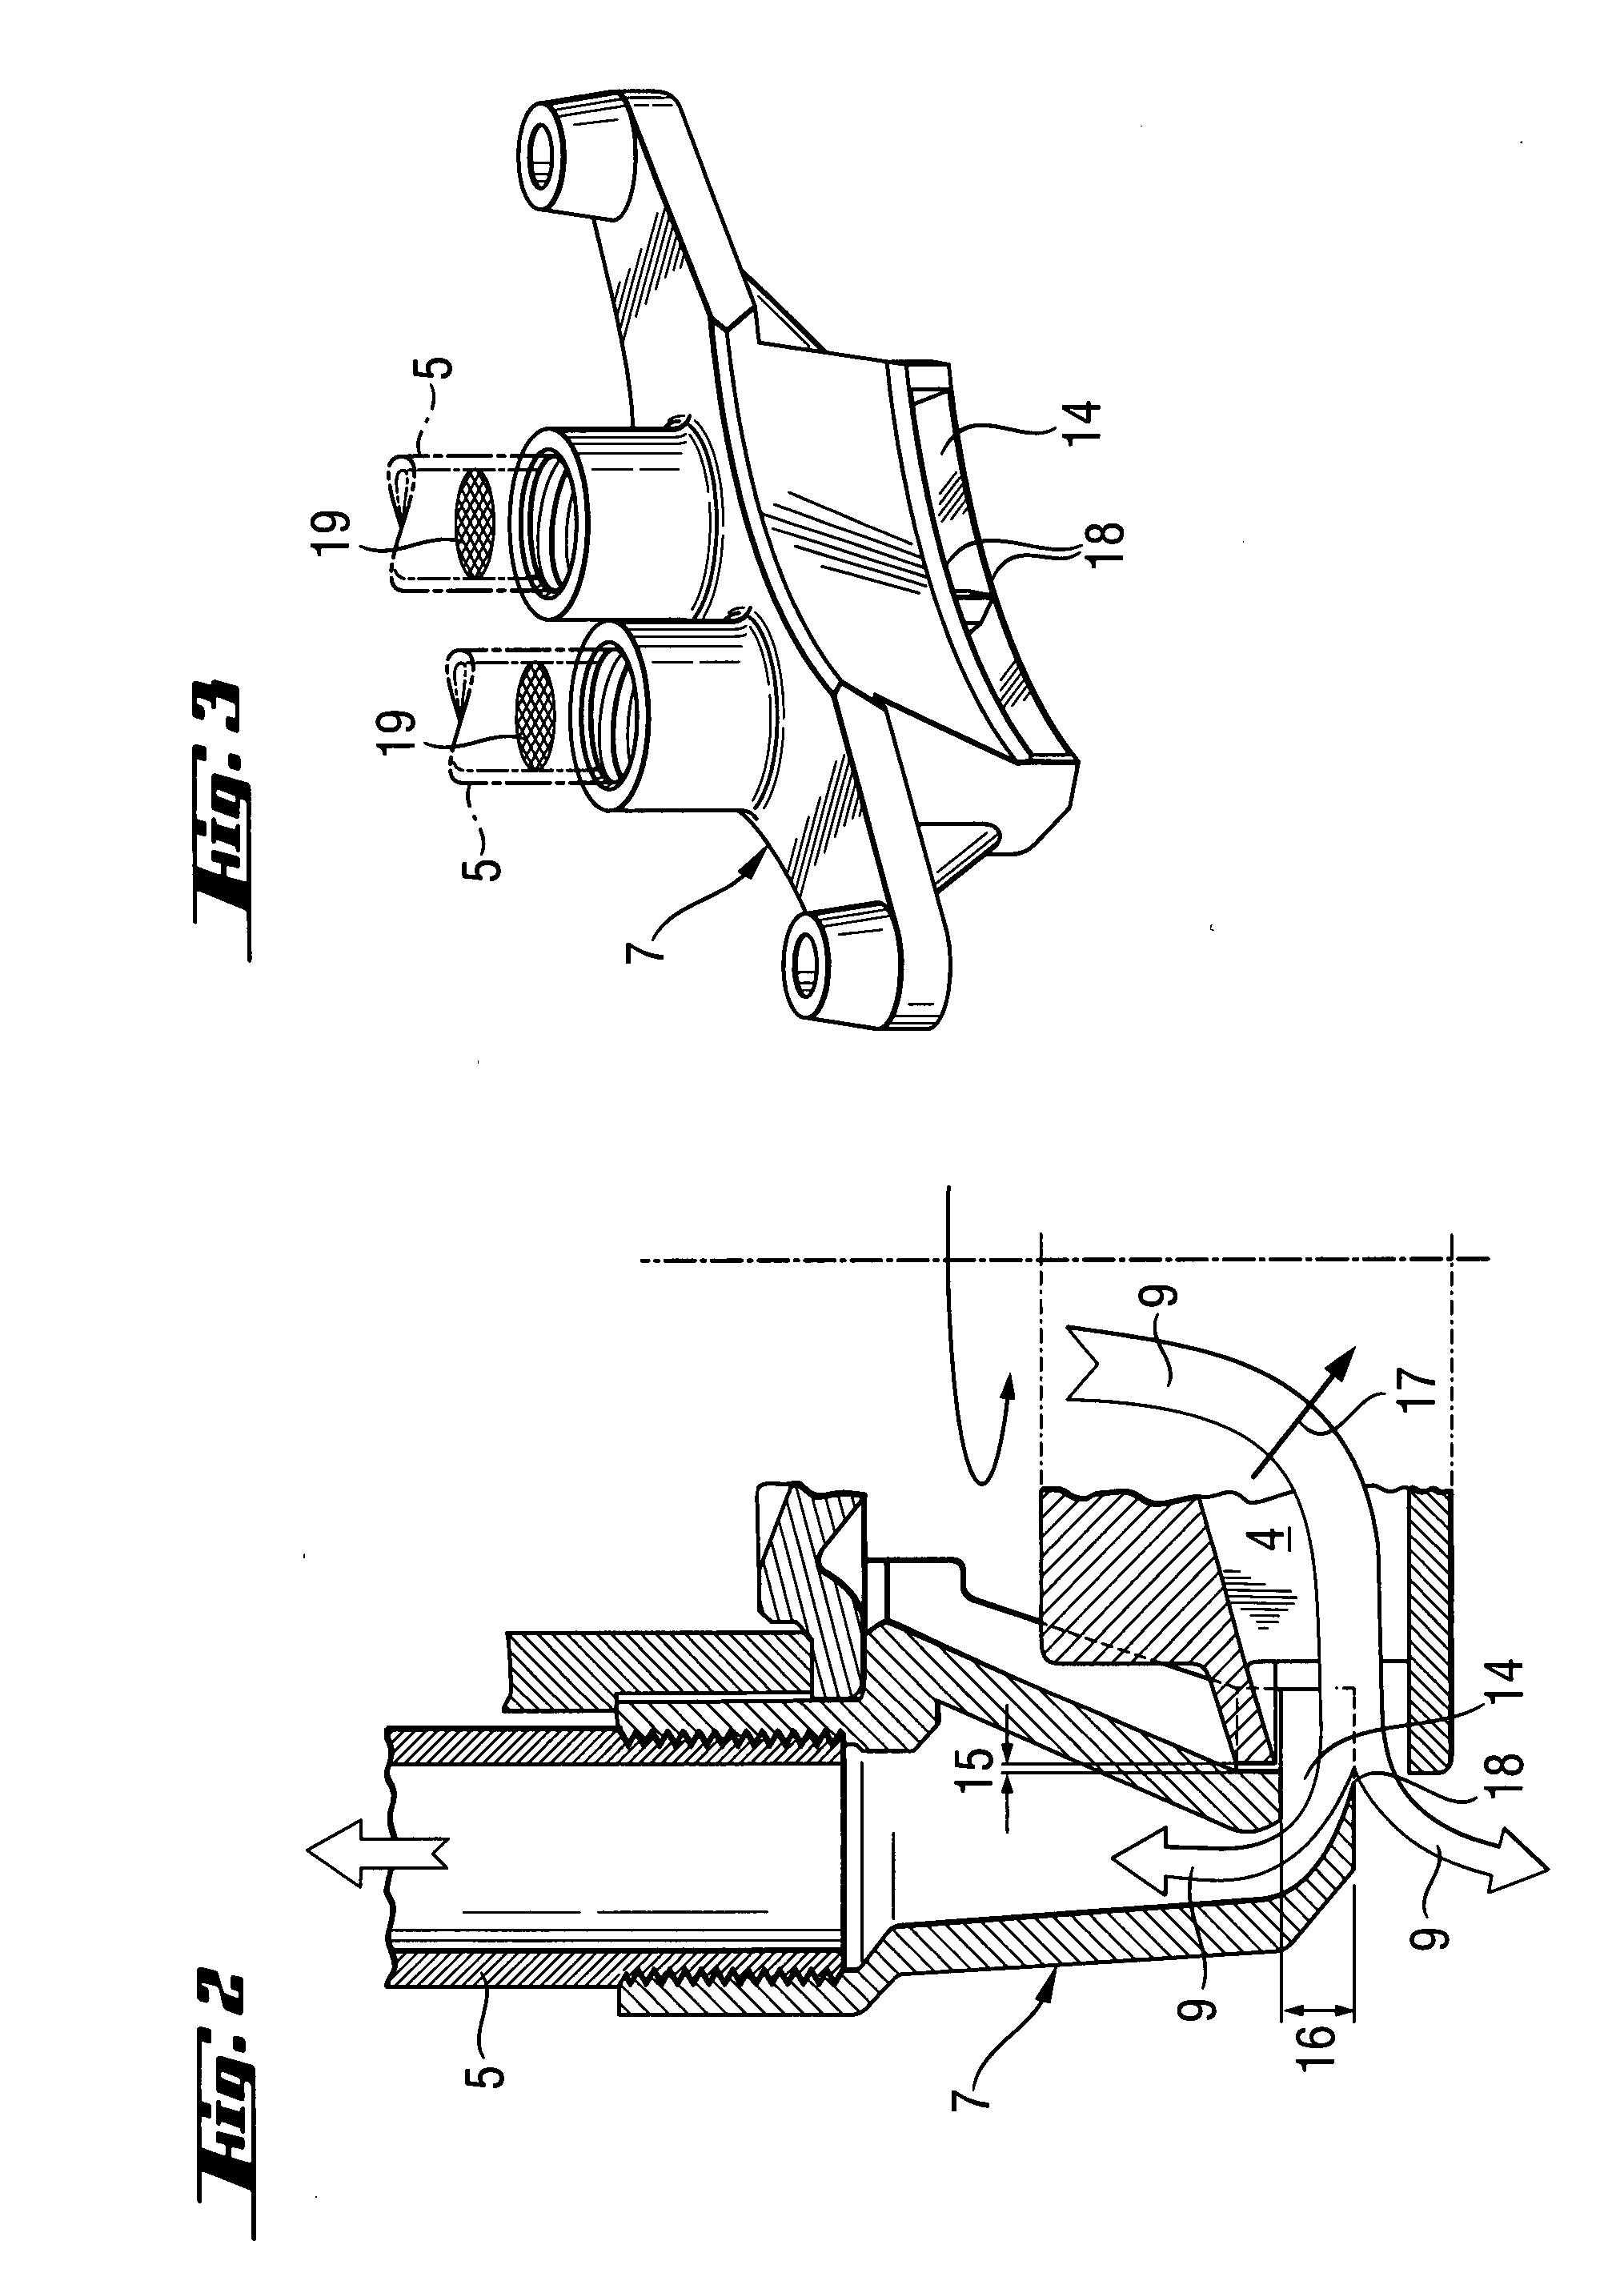 Electrical hand-held tool with a cooling fan